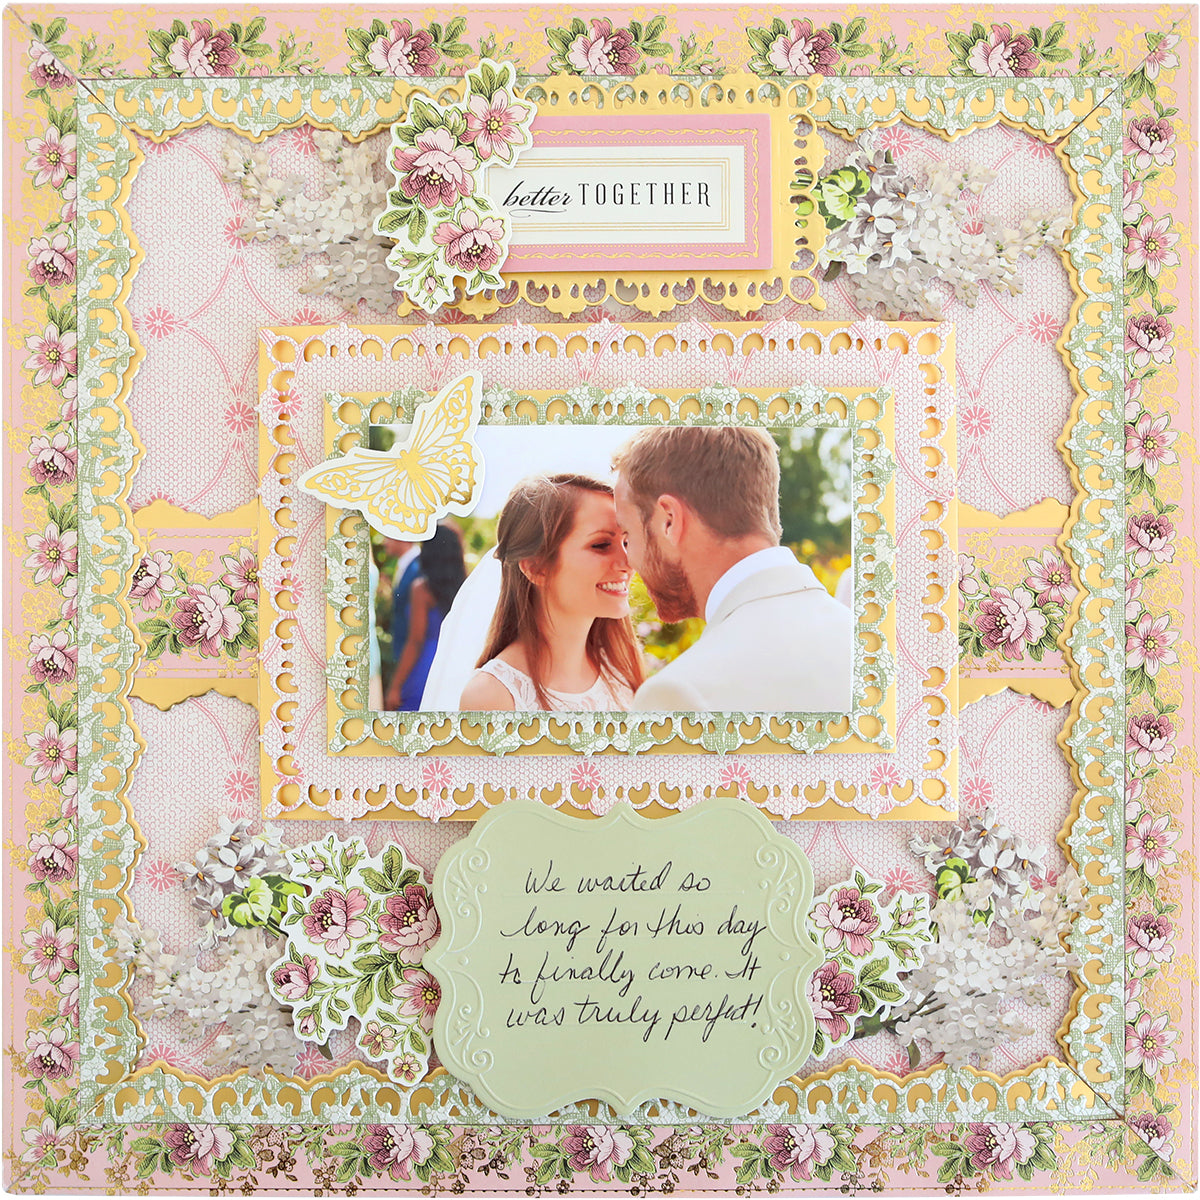 A decorative scrapbook page featuring a photo of a smiling couple looking at each other, surrounded by floral patterns and Journaling Tags Cut and Emboss Folders text.